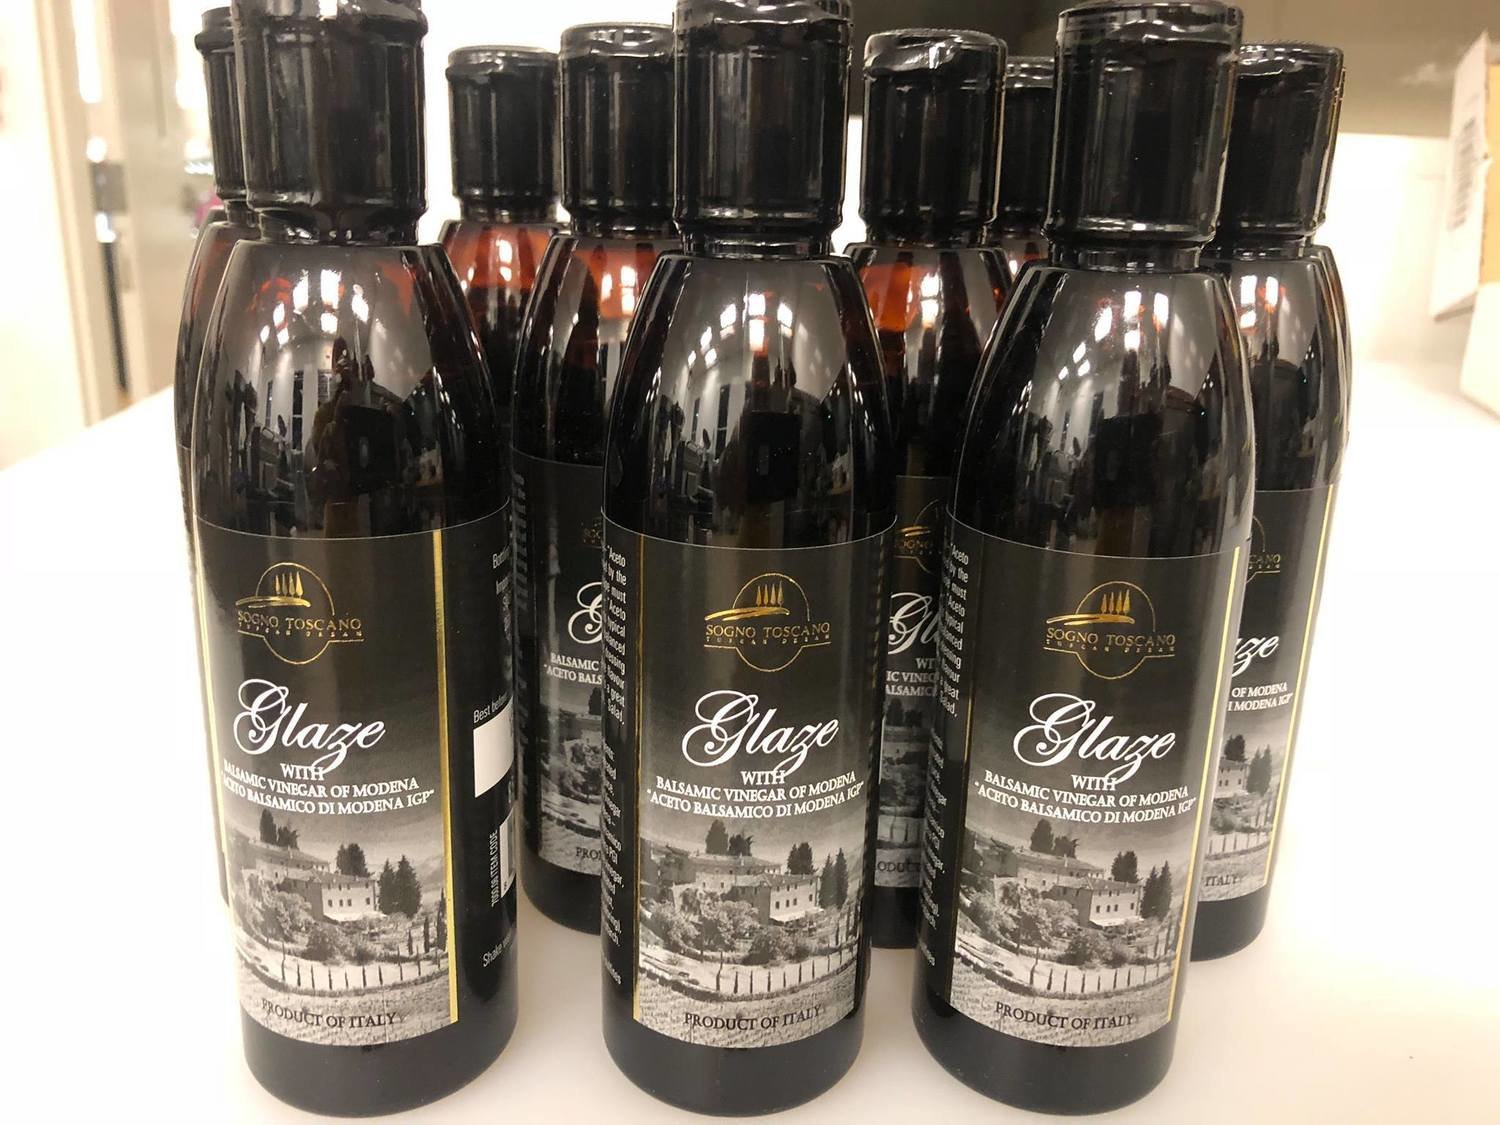 Balsamic Glaze (Product of Italy)